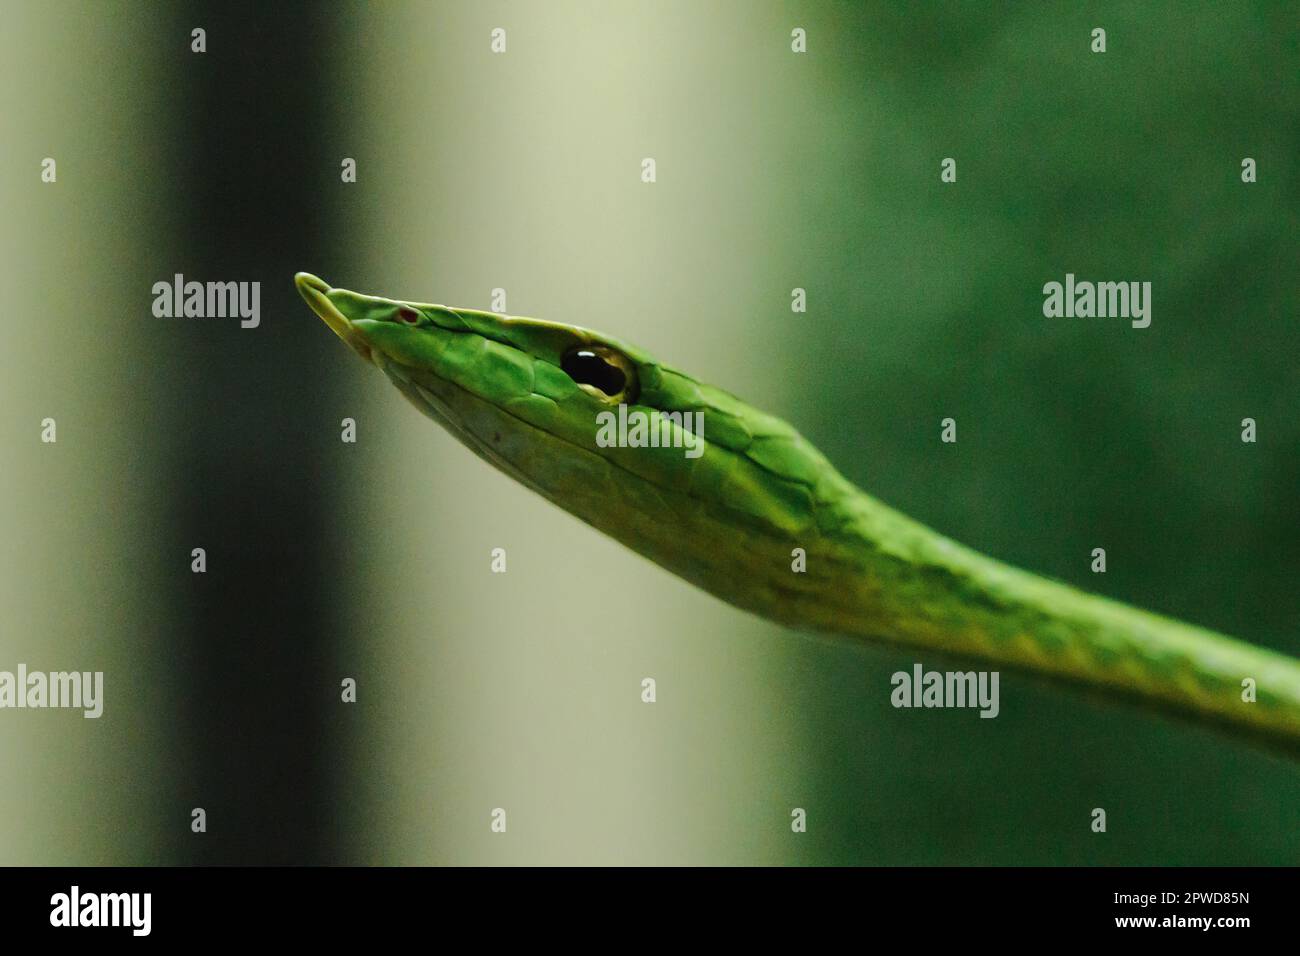 Long-nosed whip snake is a kind of poisonous snake Living most of the tree life Stock Photo